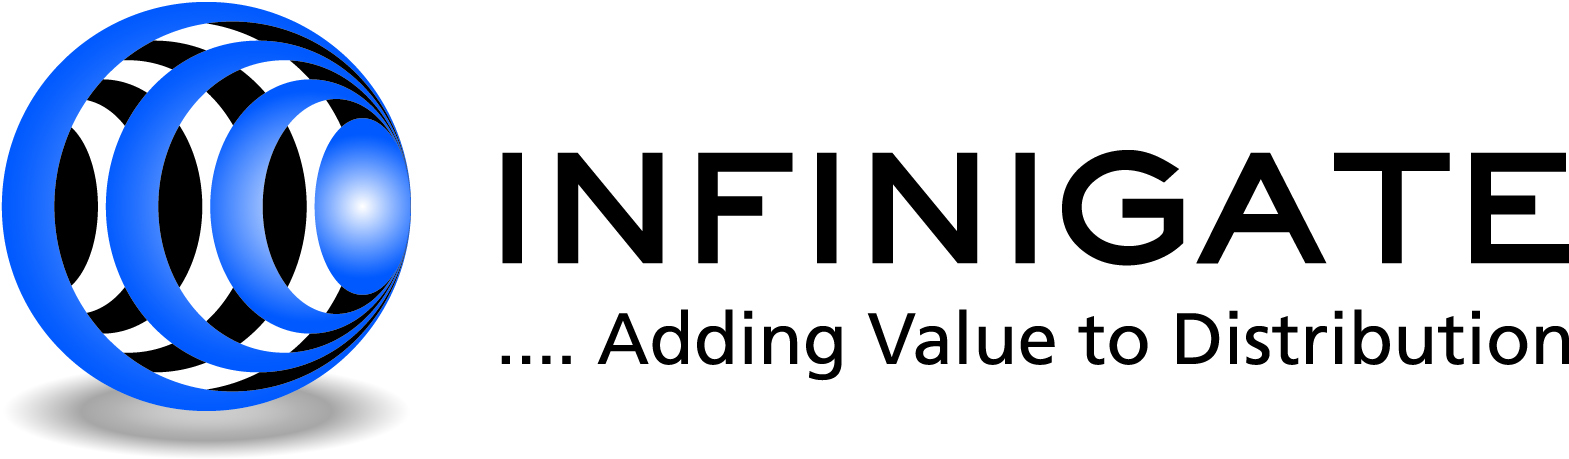 INFINIGATE Value Added IT Security Distribution